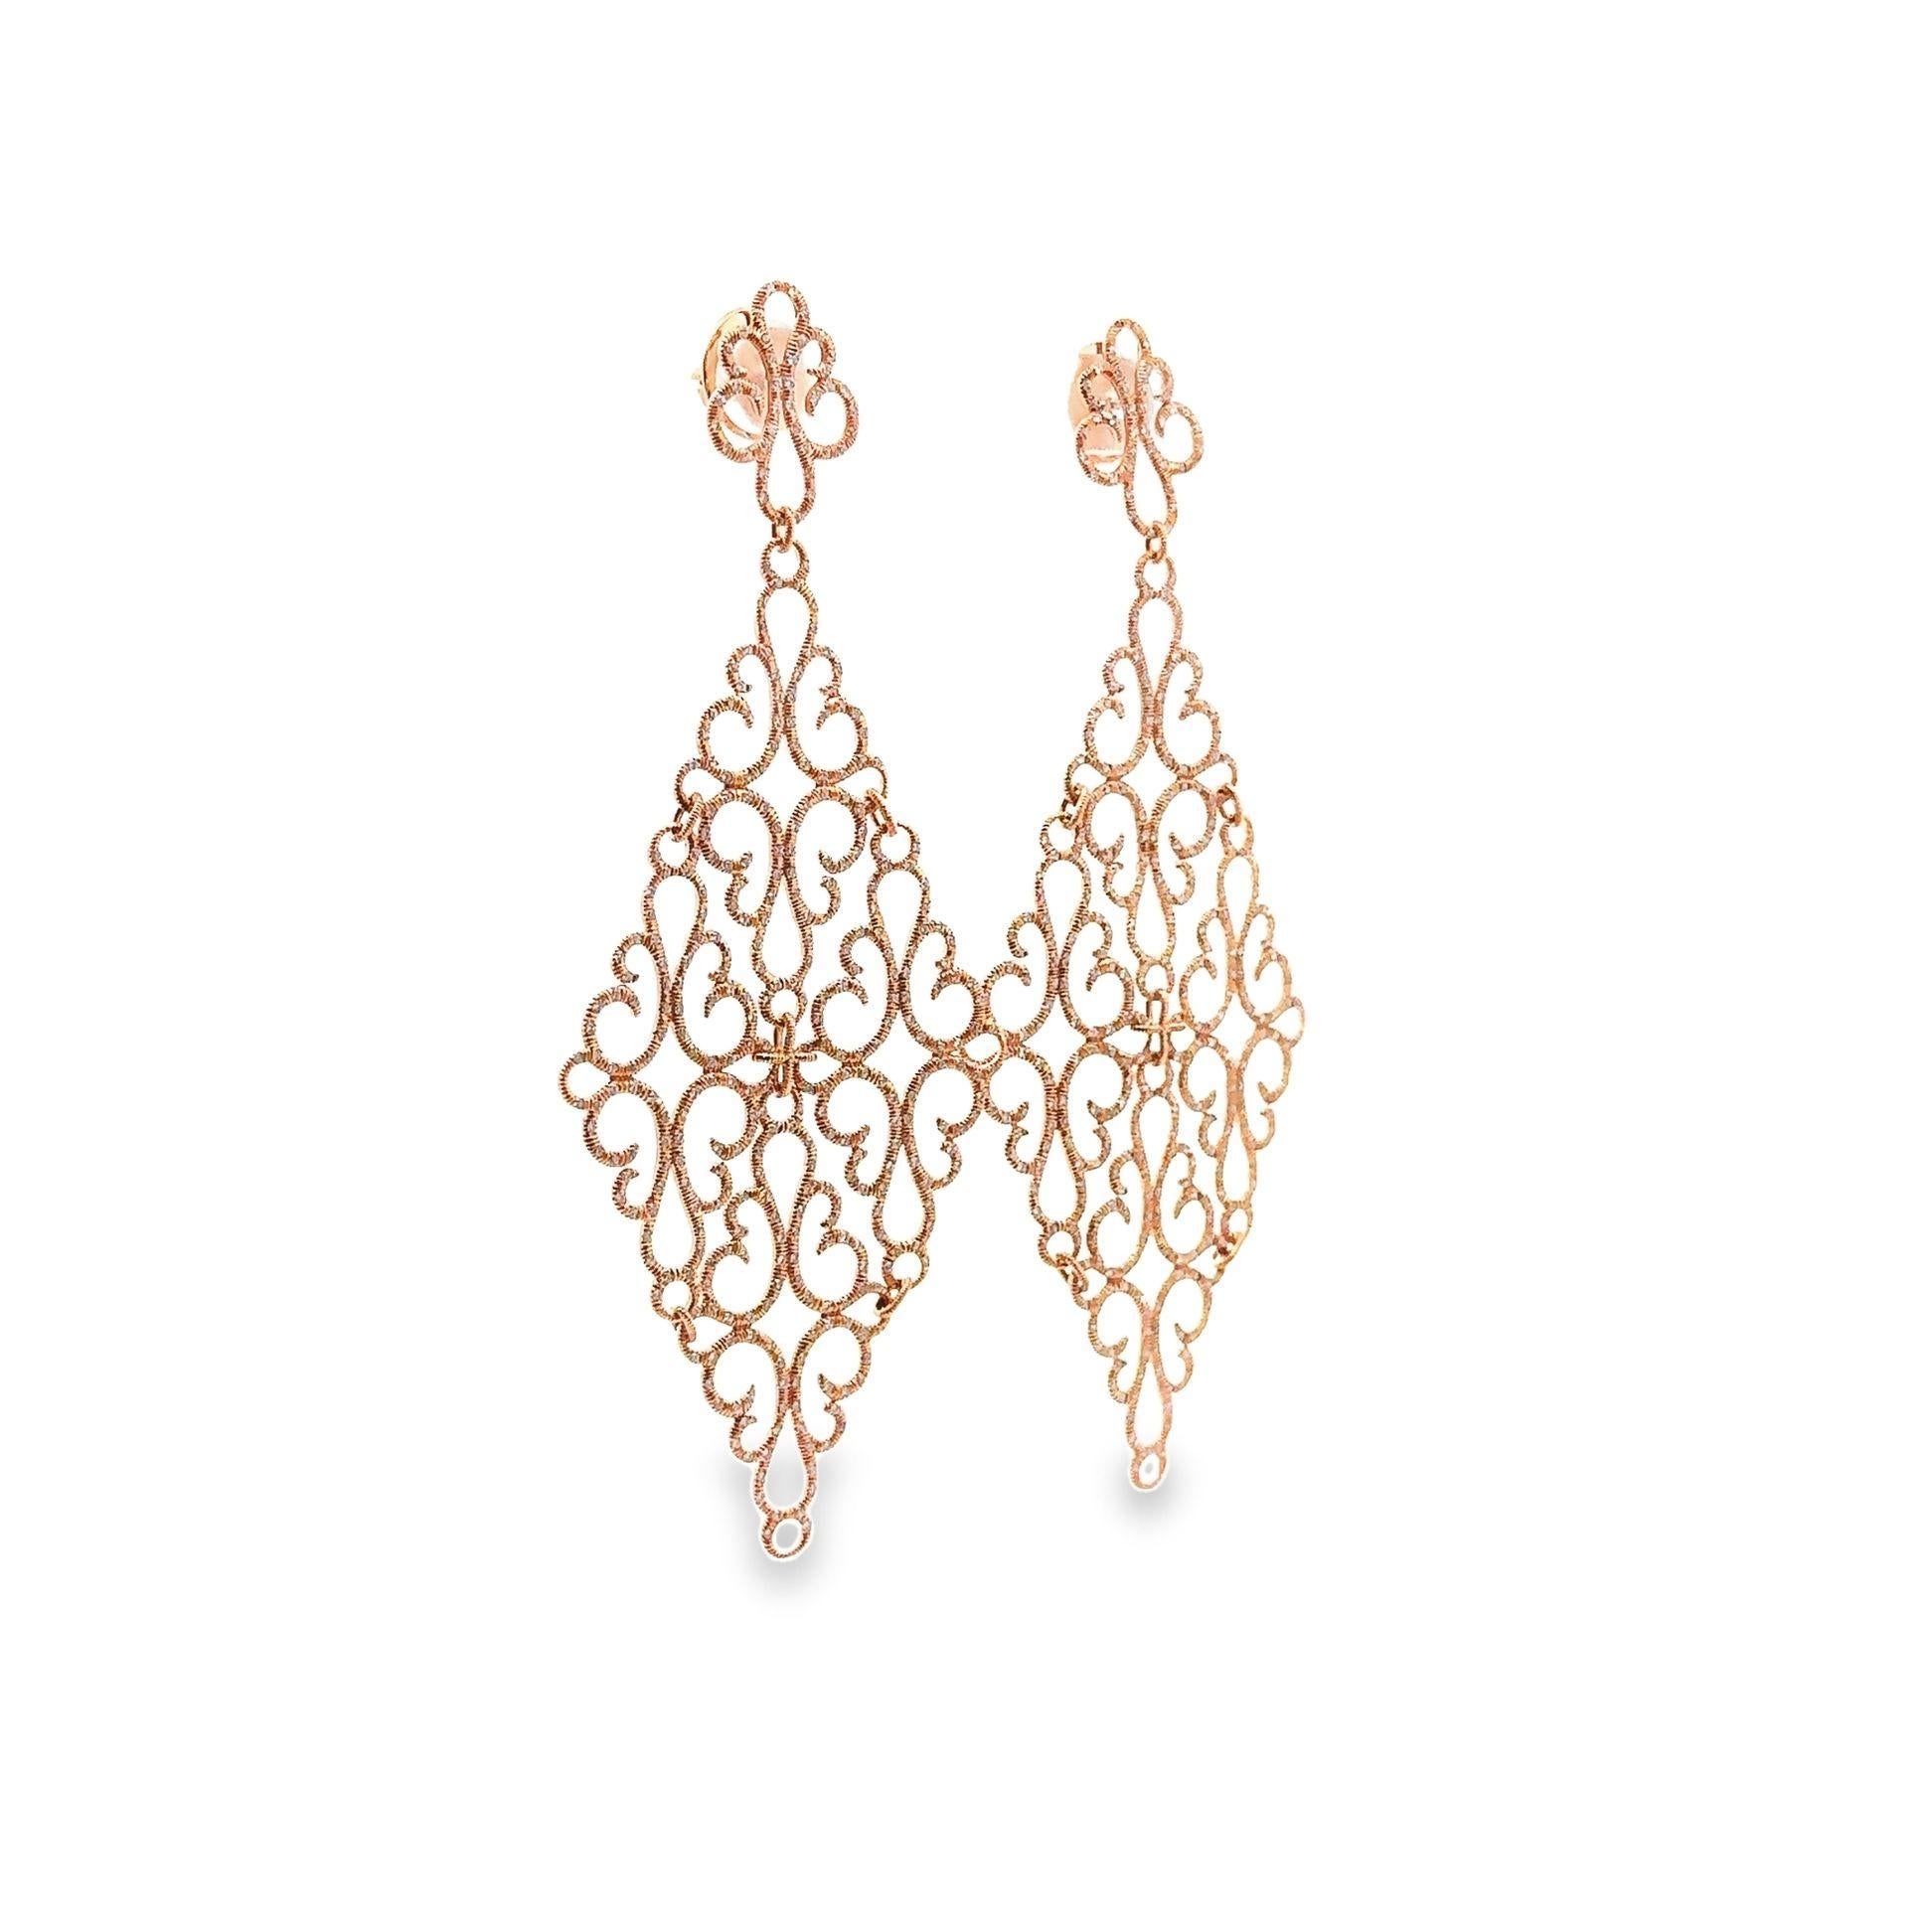 A marvelous flexible pair of earrings made of 18k rose gold featuring fine filigree craftsmanship. They feature 2.89 carats of round brilliant-cut diamonds, creating a fluid and elegant design. The Chandelier style exudes a charming and sparkling